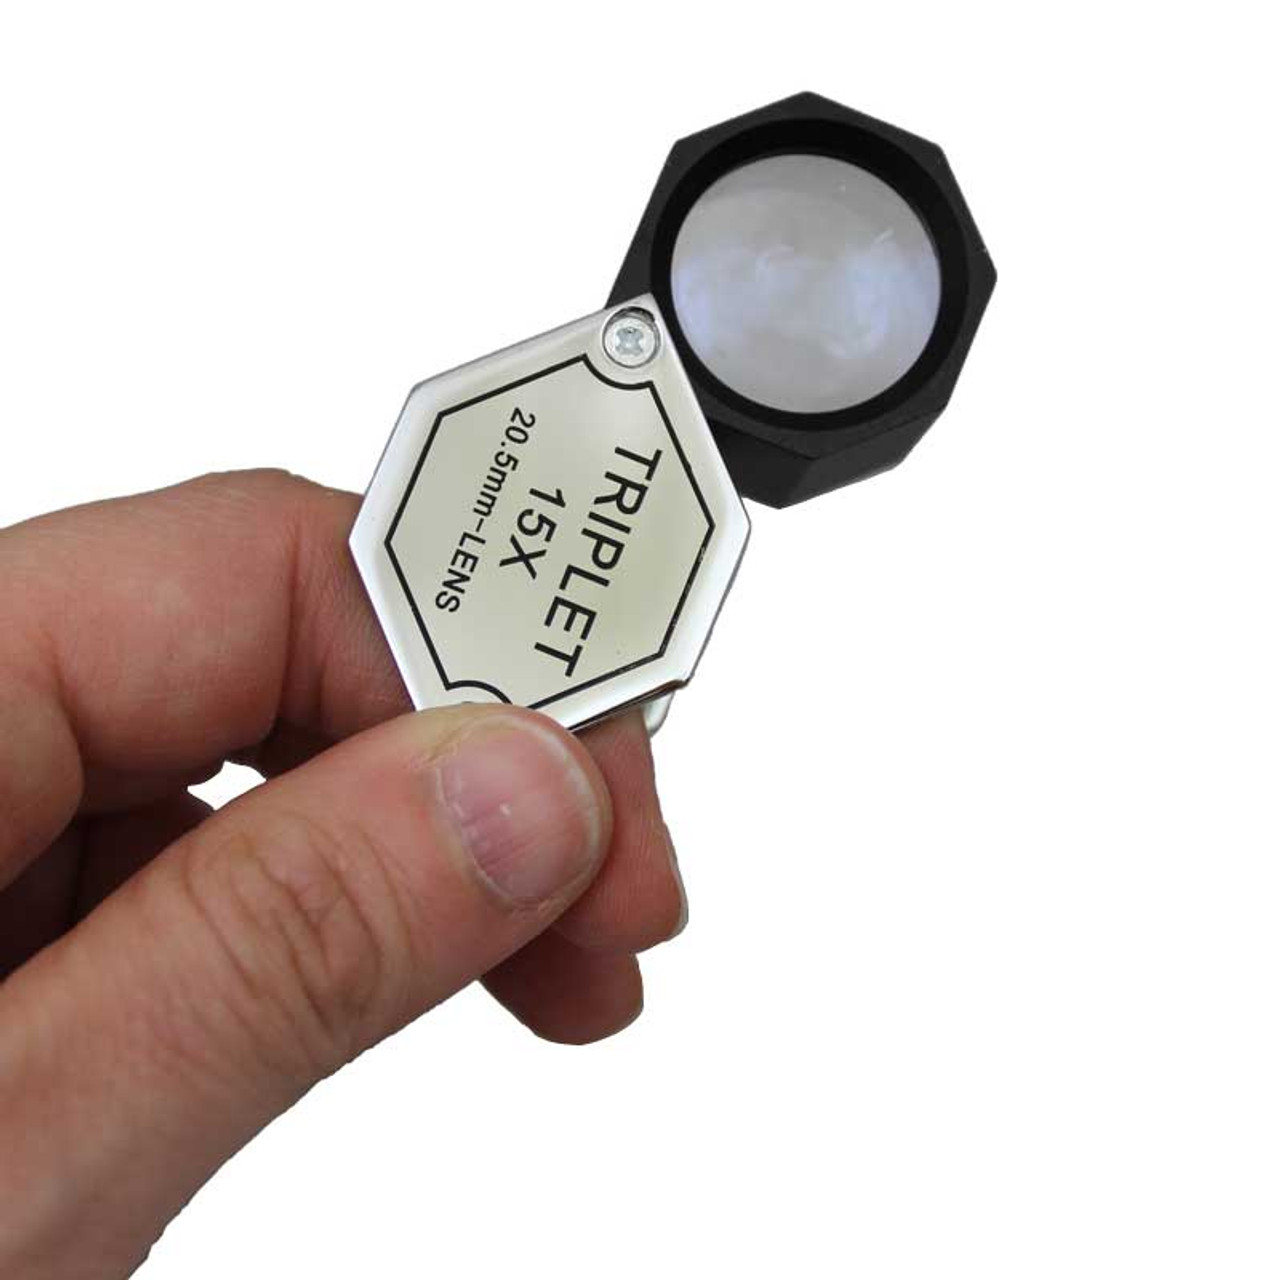 BelOMO 15x Triplet Loupe Magnifier Optical Glass with Anti-Reflection  Coating